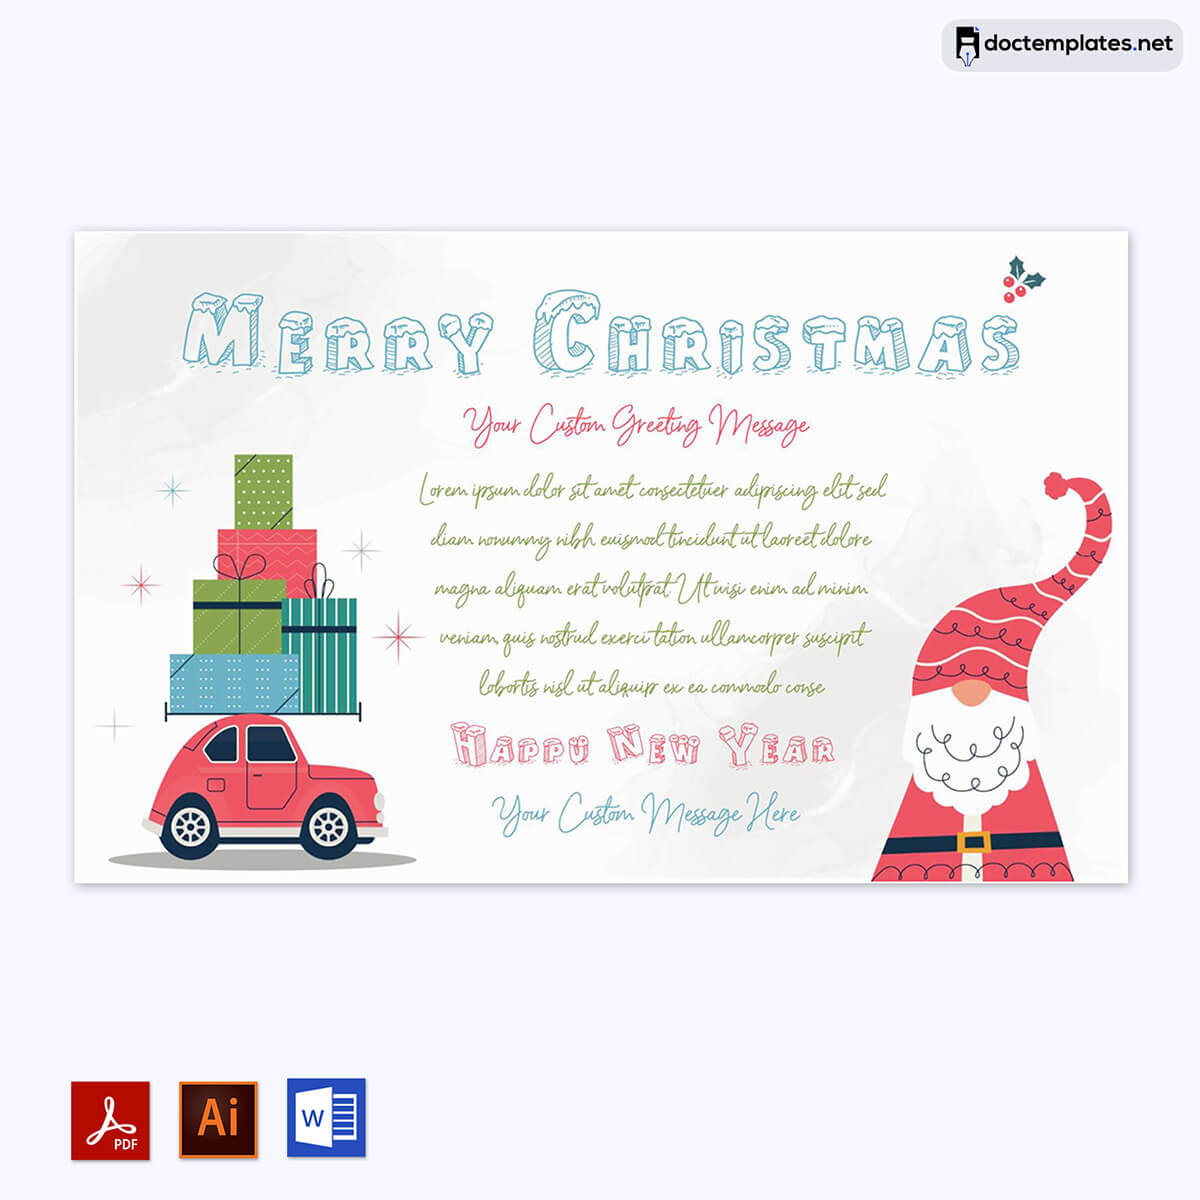 Image of Free holiday voucher template
Free holiday voucher template
